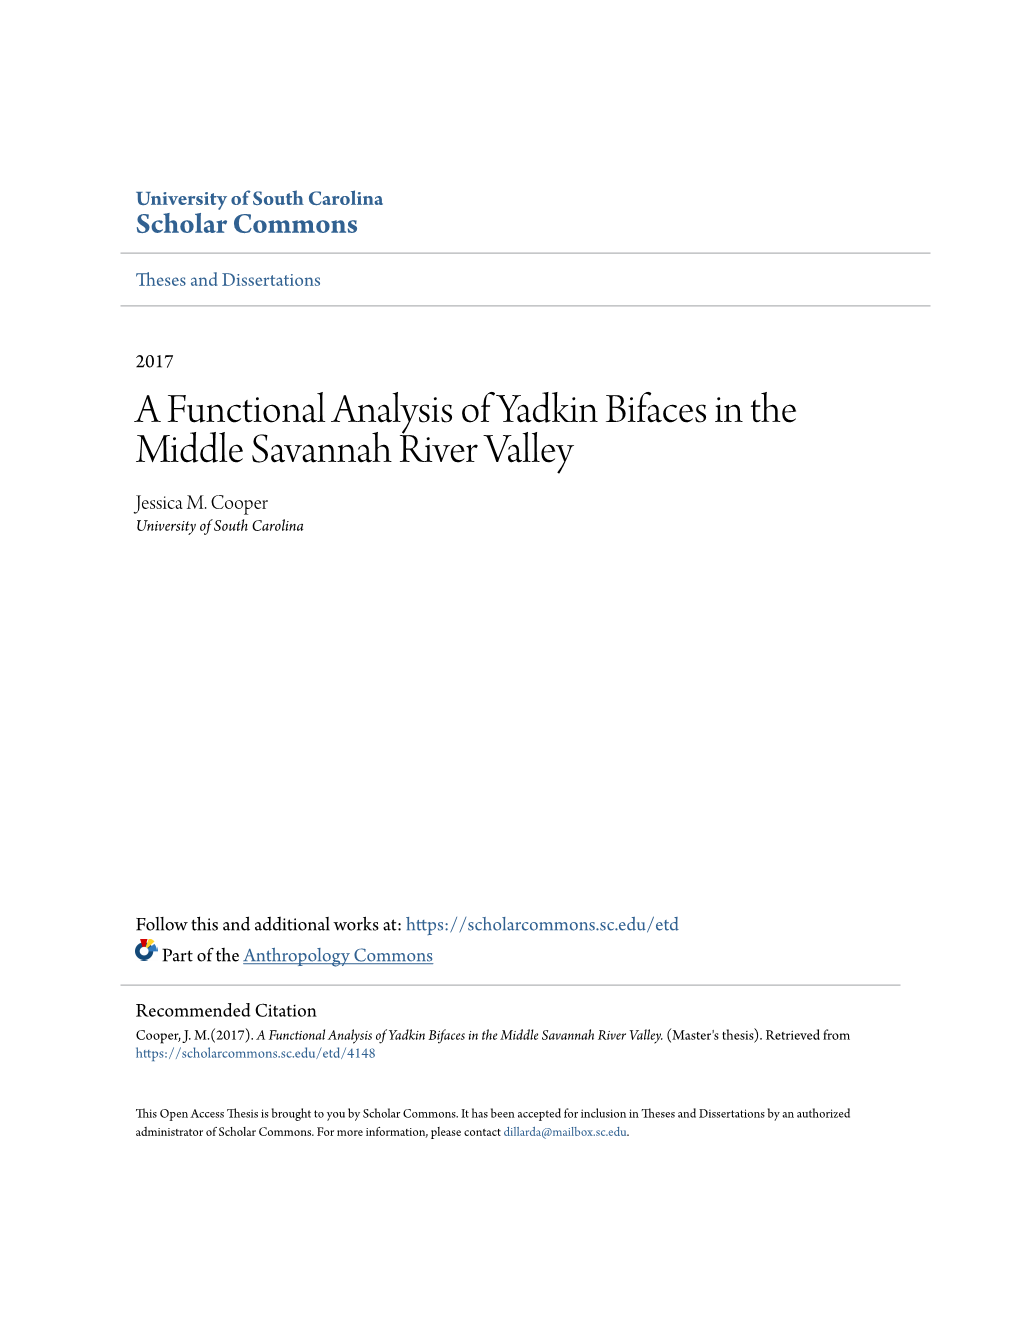 A Functional Analysis of Yadkin Bifaces in the Middle Savannah River Valley Jessica M